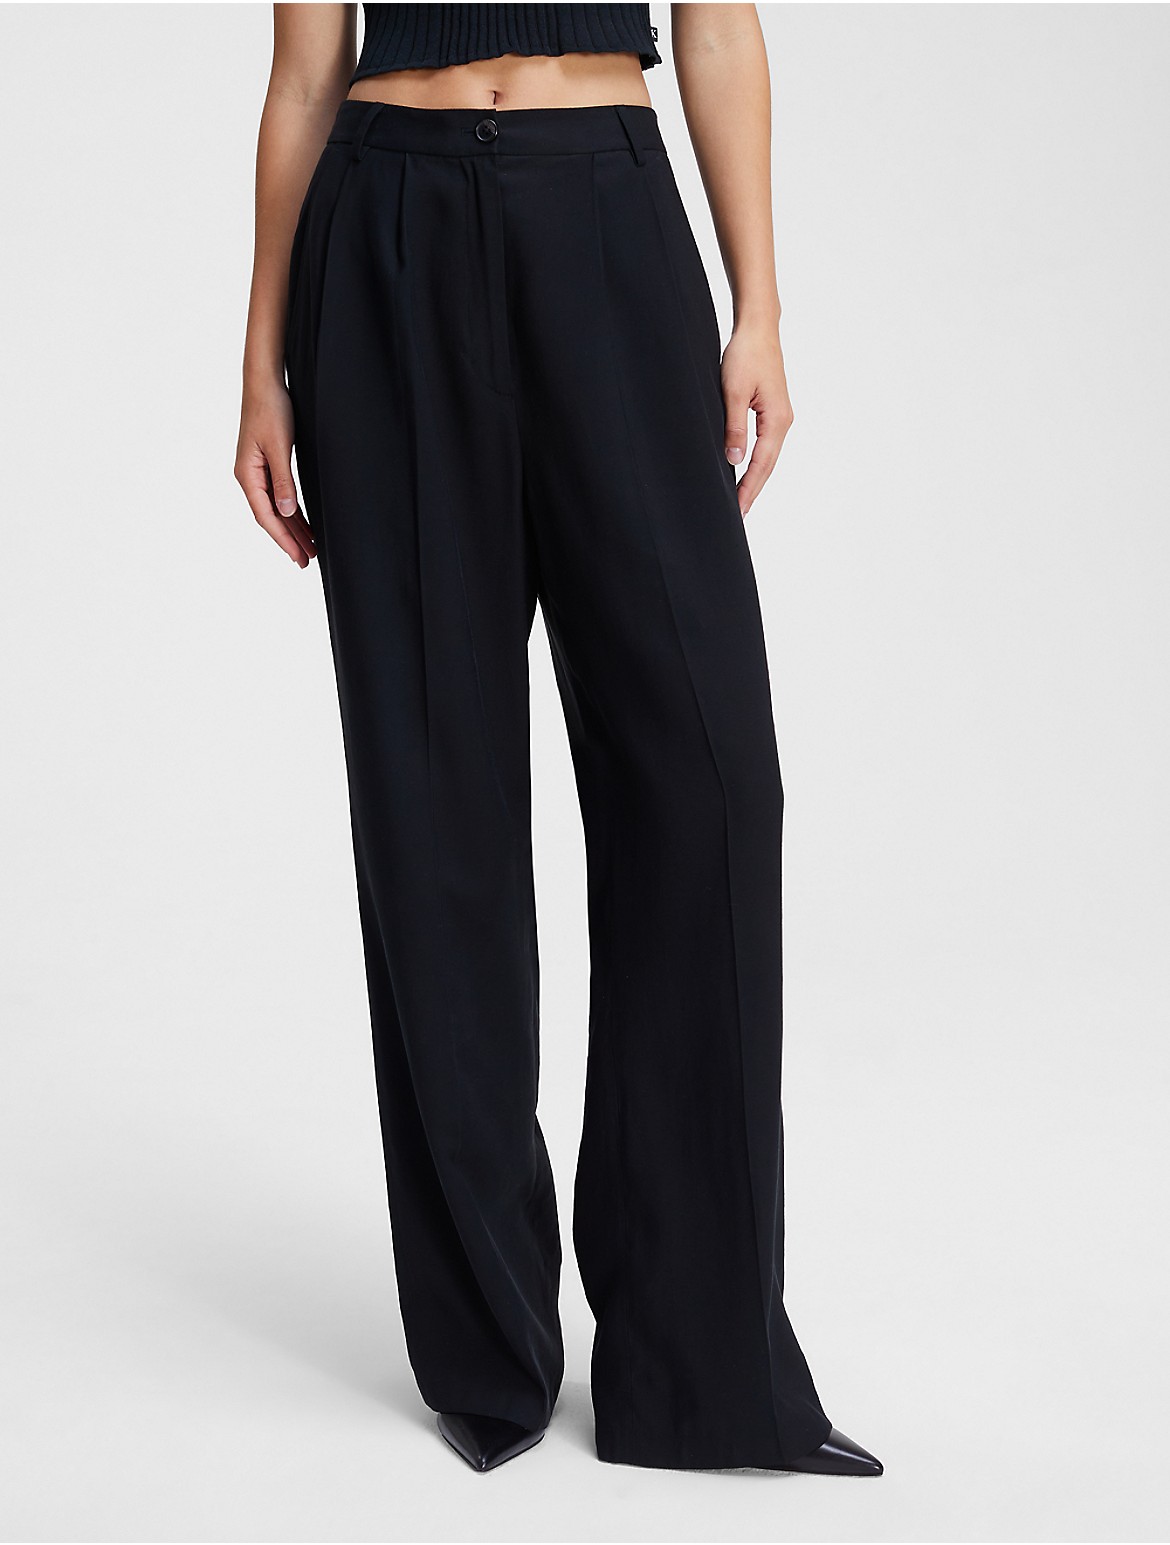 Calvin Klein Women's Soft Twill Relaxed Pant - Black - 25